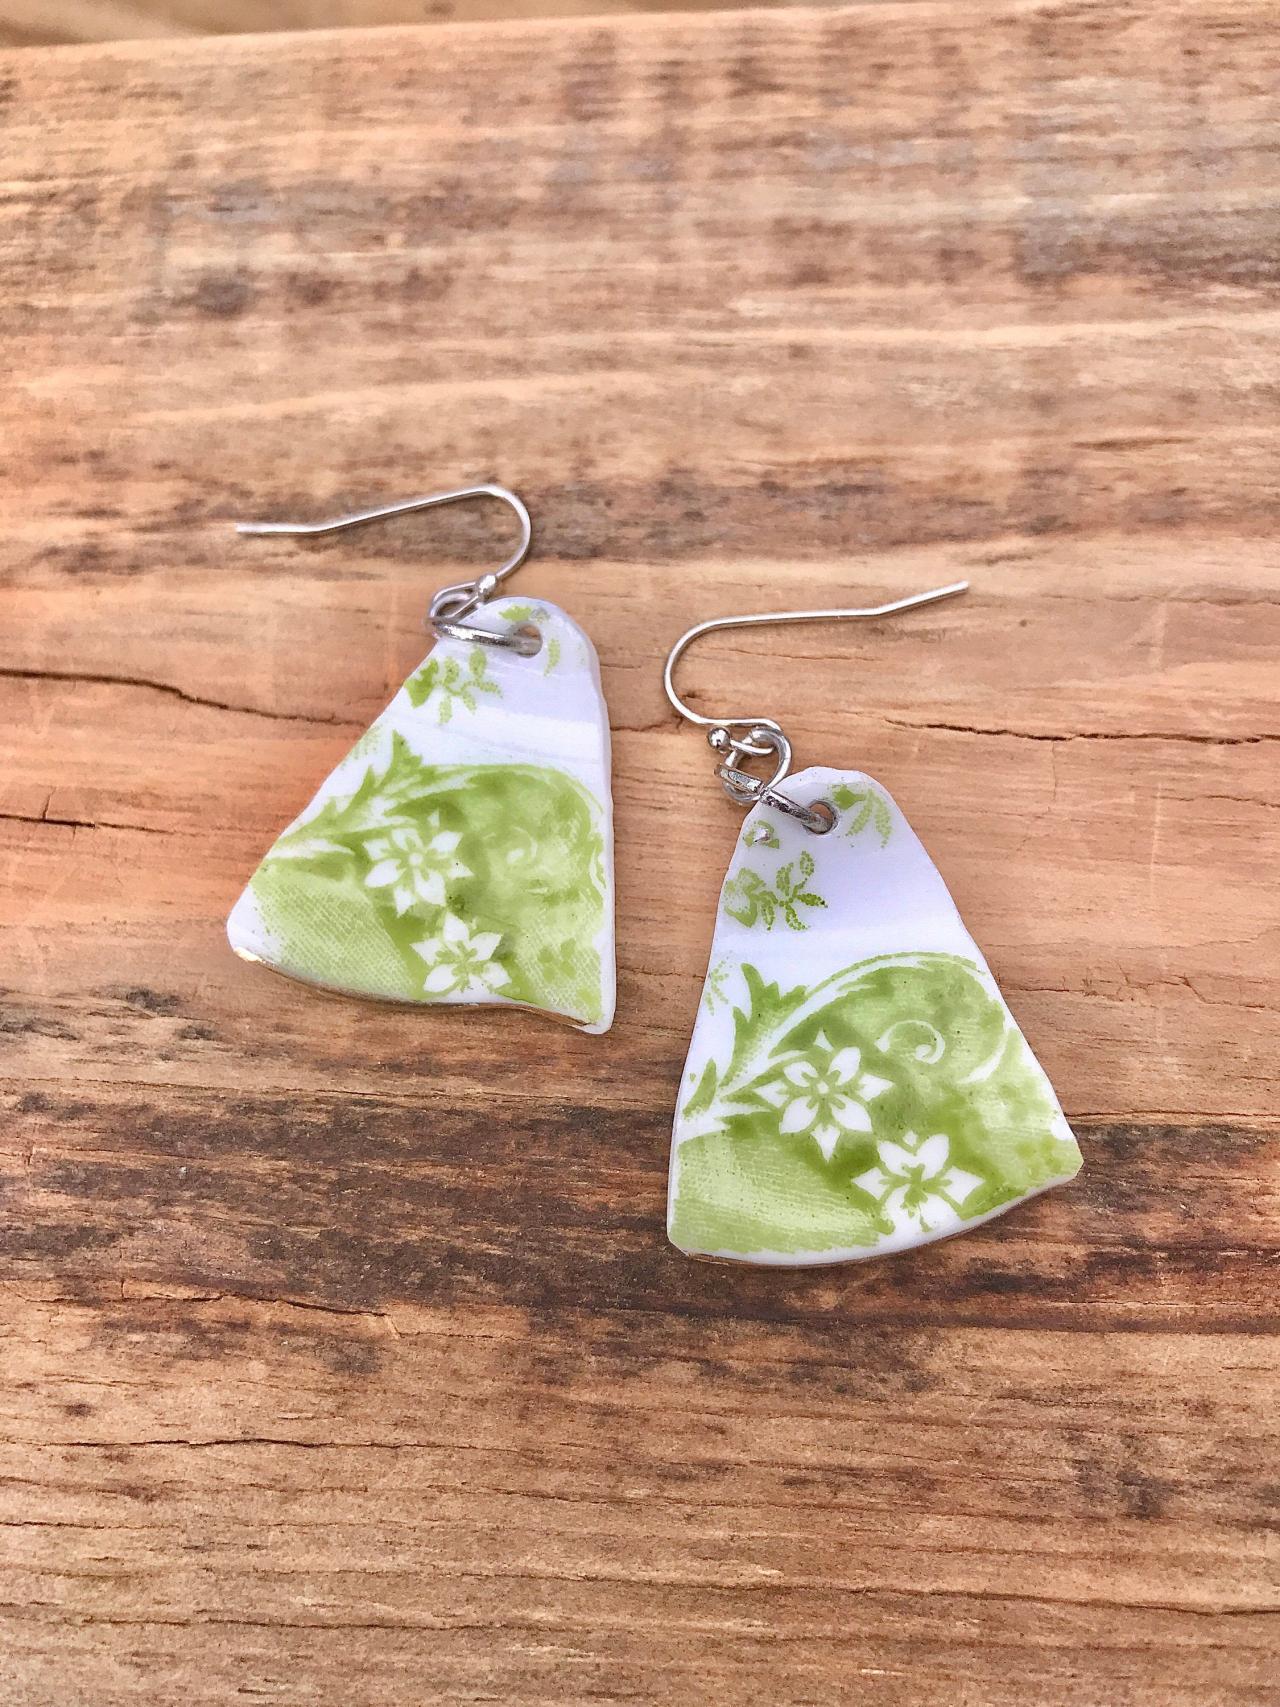 Gorgeous Green Floral Vintage Recycled Broken China Earrings With Sterling Silver Wires.